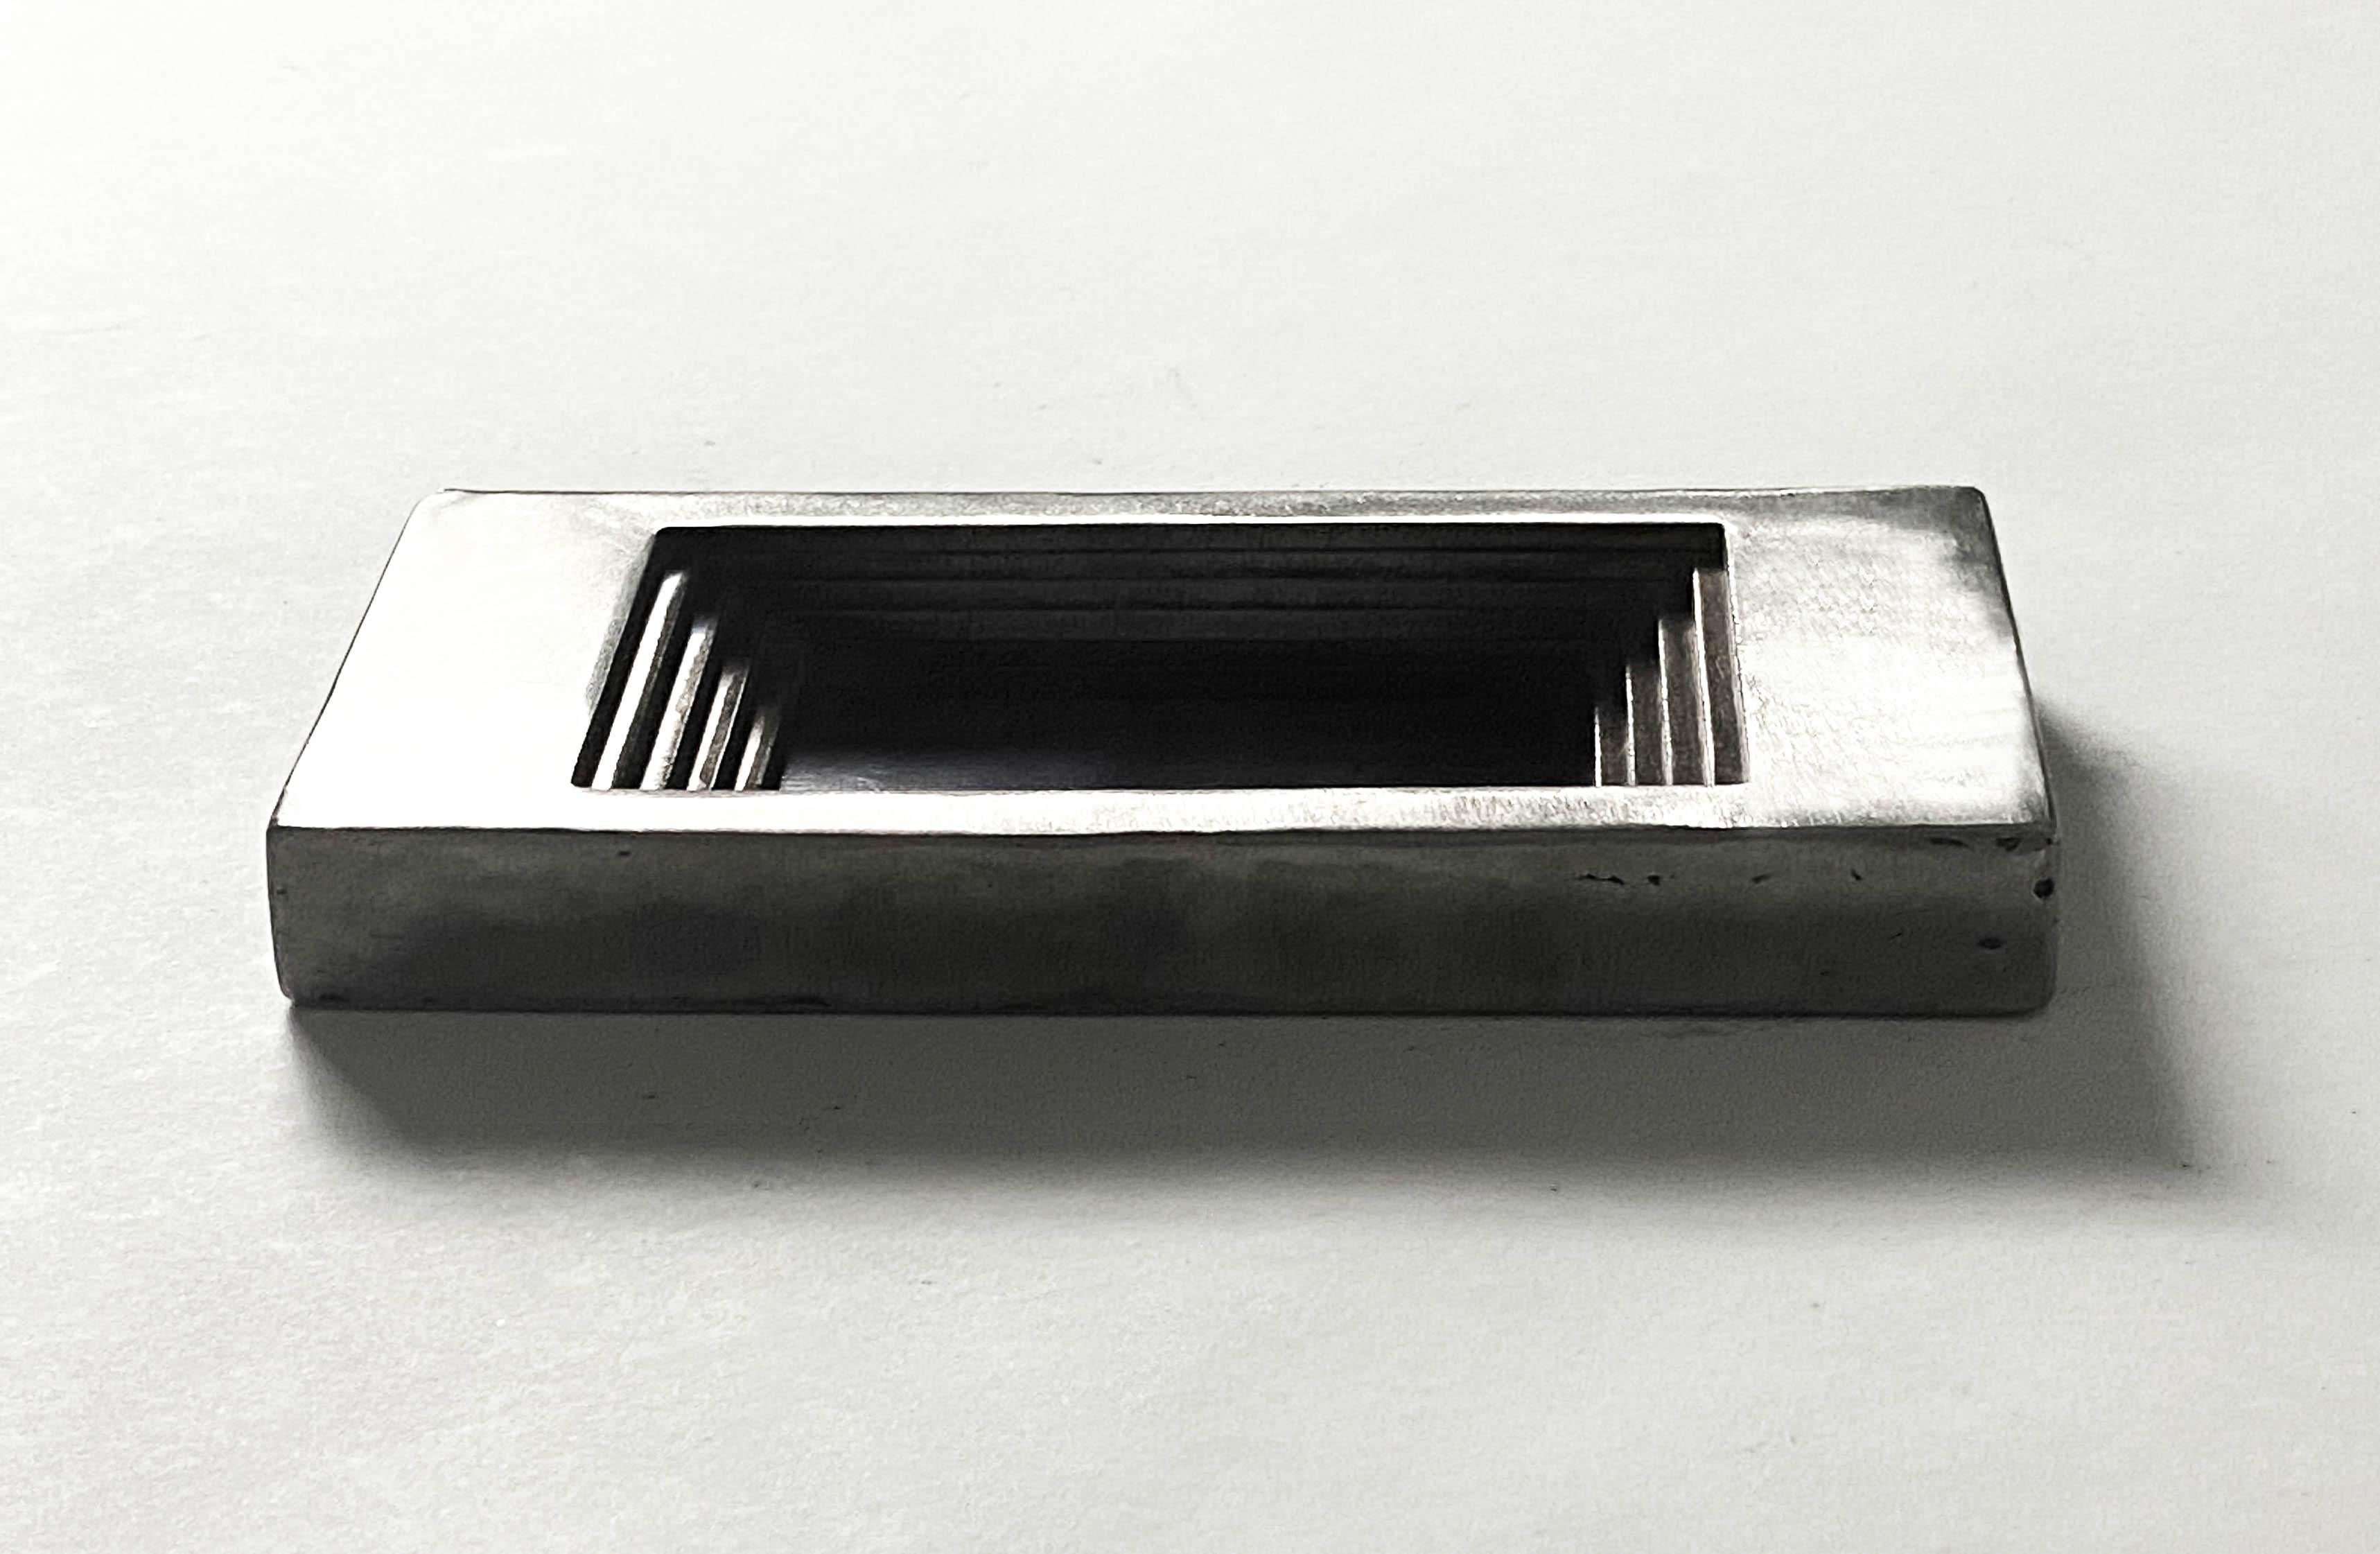 Fall Regular Ashtray by Cal Summers
Dimension:  D 6.8 x W 15 x H 2 cm
Materials: Stainless Steel.

Cal Summers is a British designer who makes bespoke handmade furniture and contemporary artefacts in which he challenges the boundaries of materiality